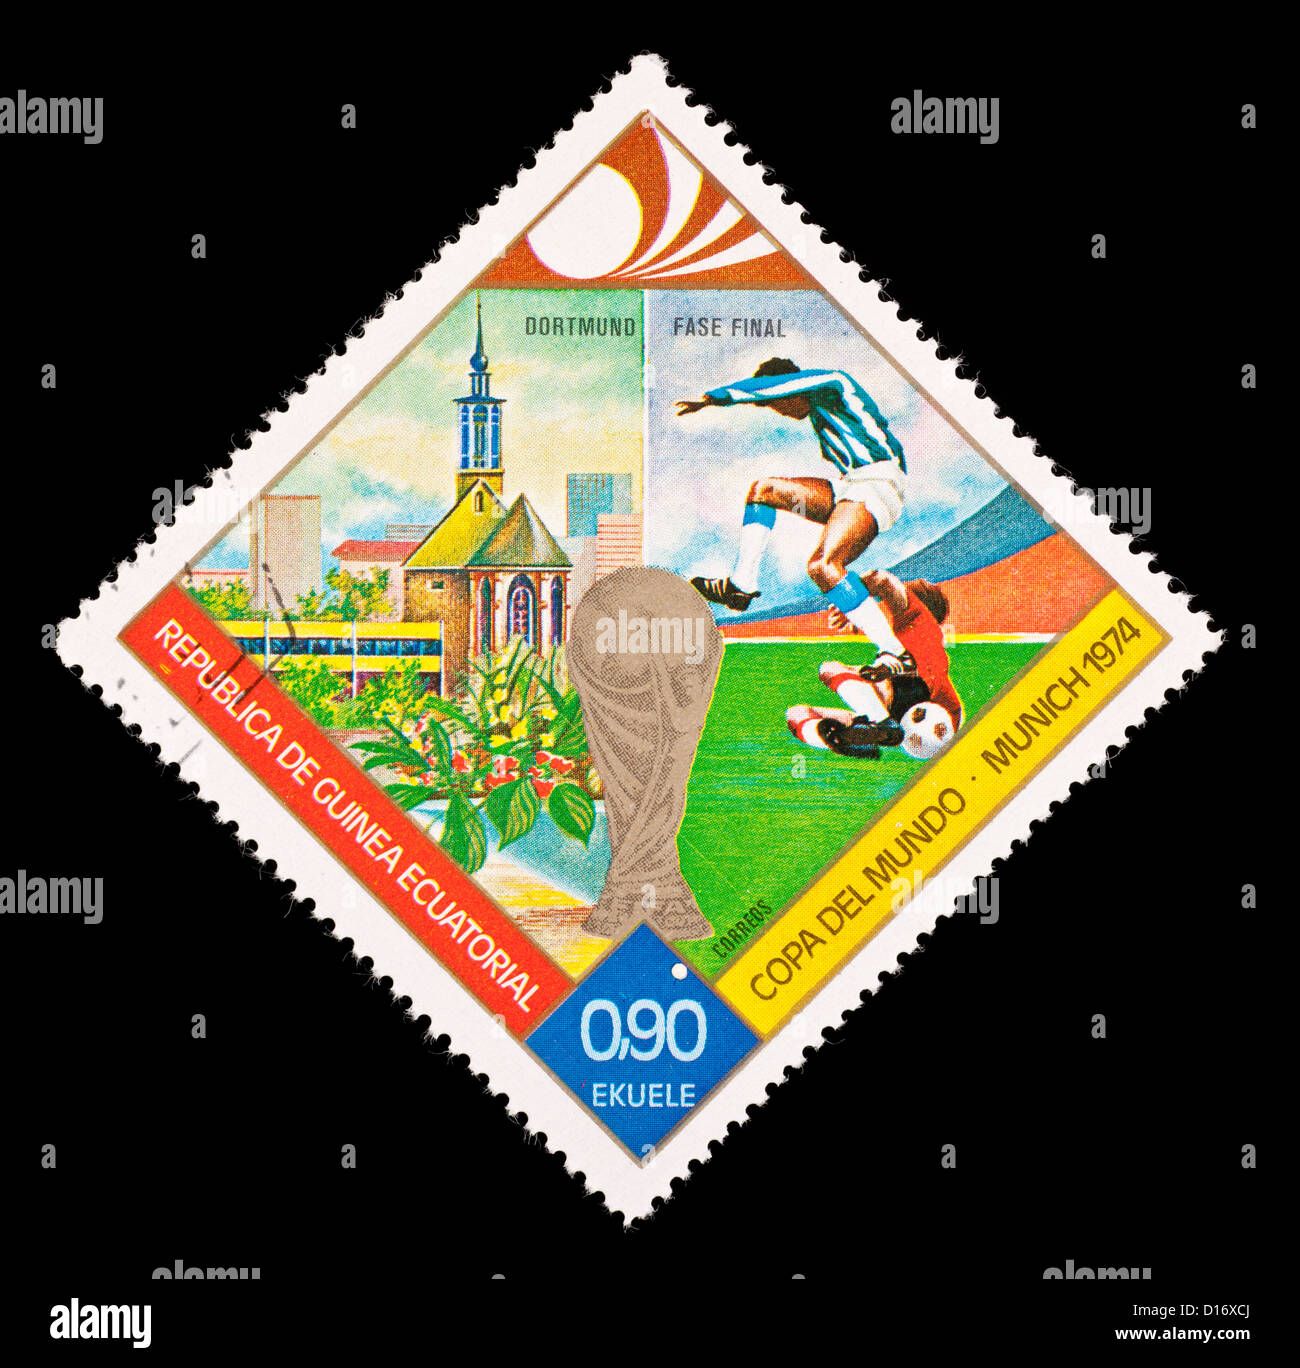 Postage stamp from Equatorial Guinea depicting soccer players and the city of Munich. Stock Photo